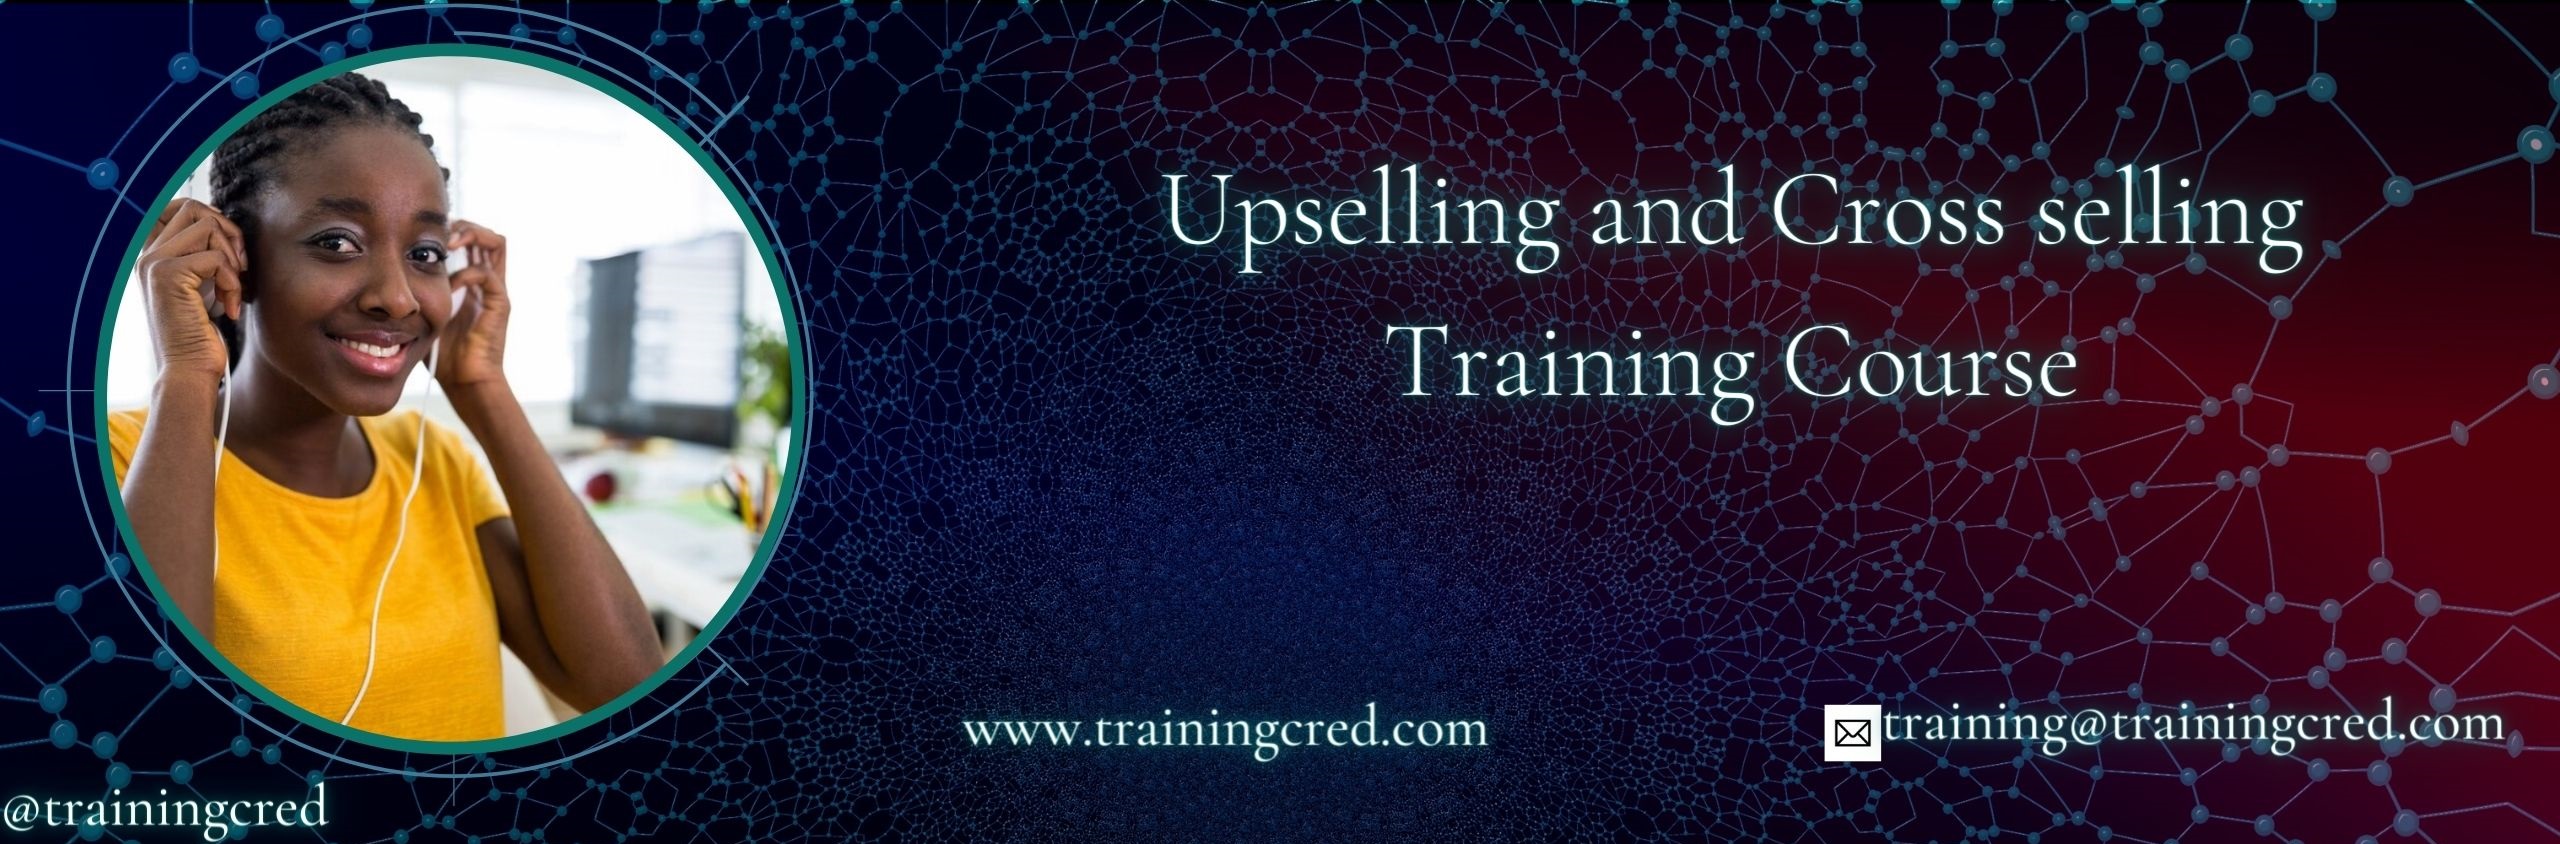 Upselling and Cross selling Training